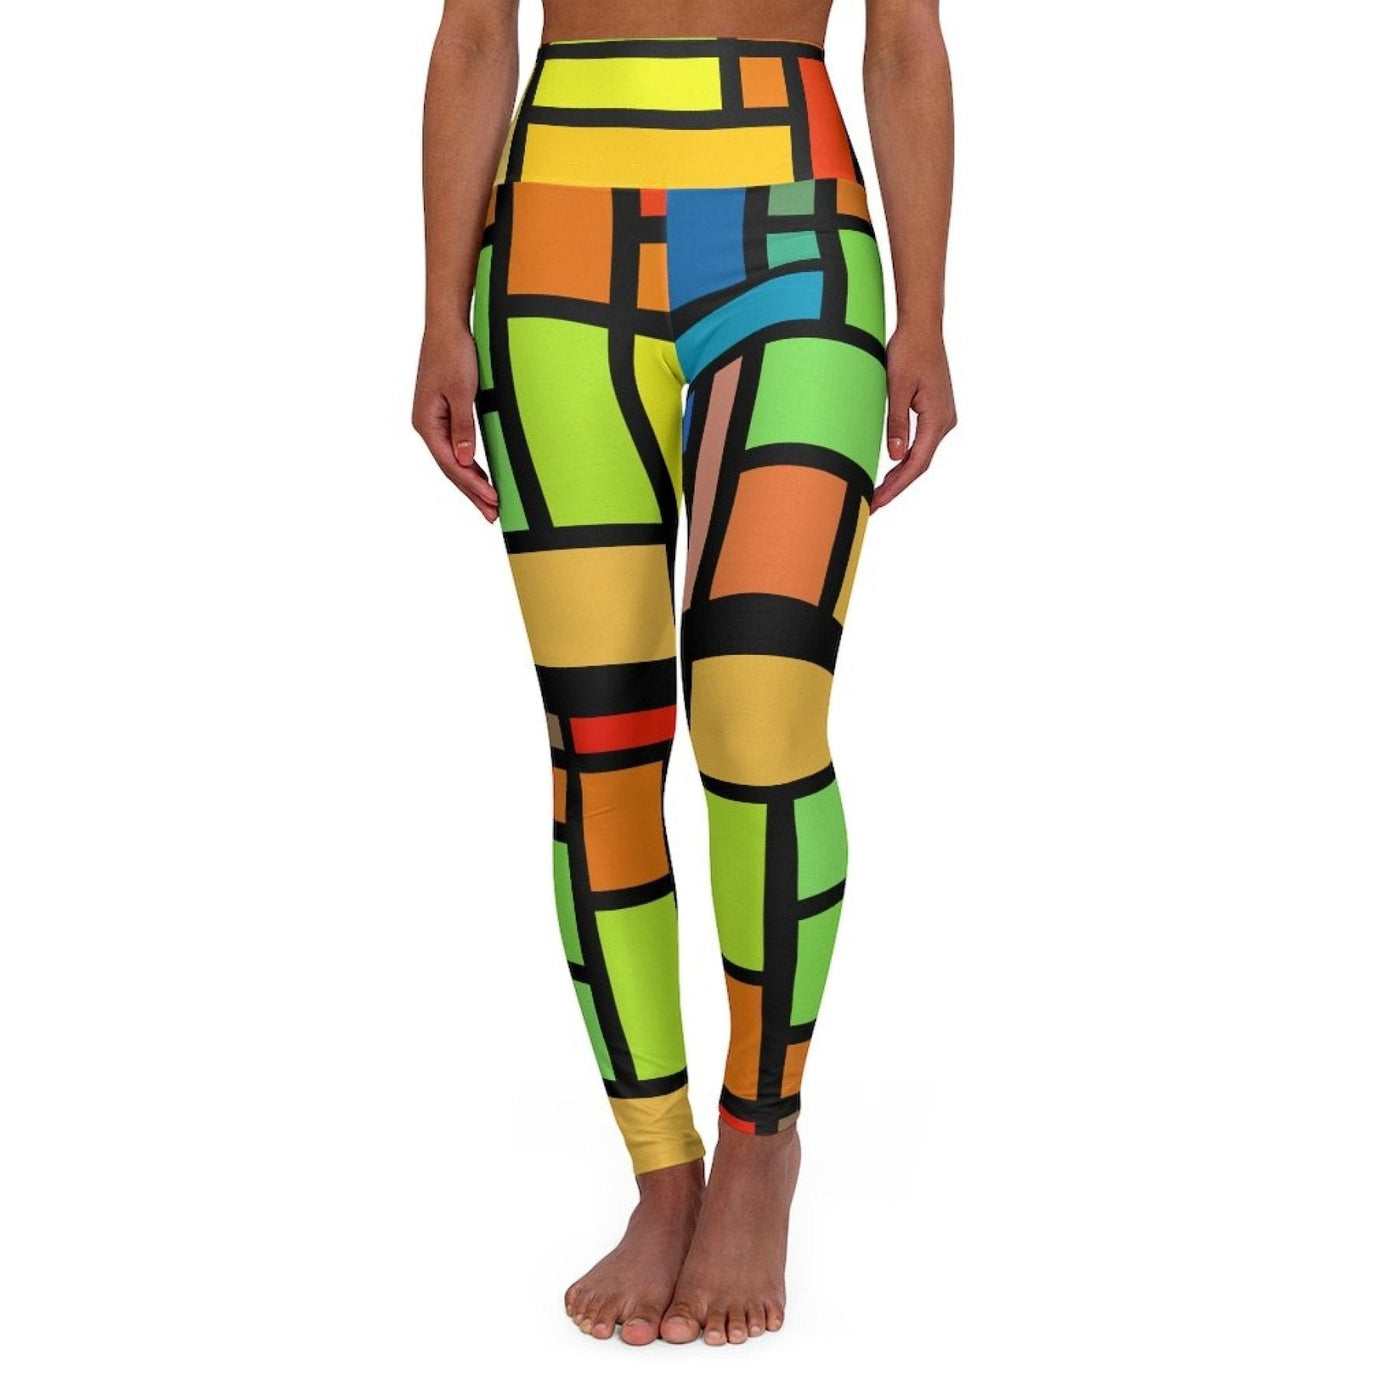 High Waisted Yoga Pants Multicolor Block And Black Grid Style Sports Pants -